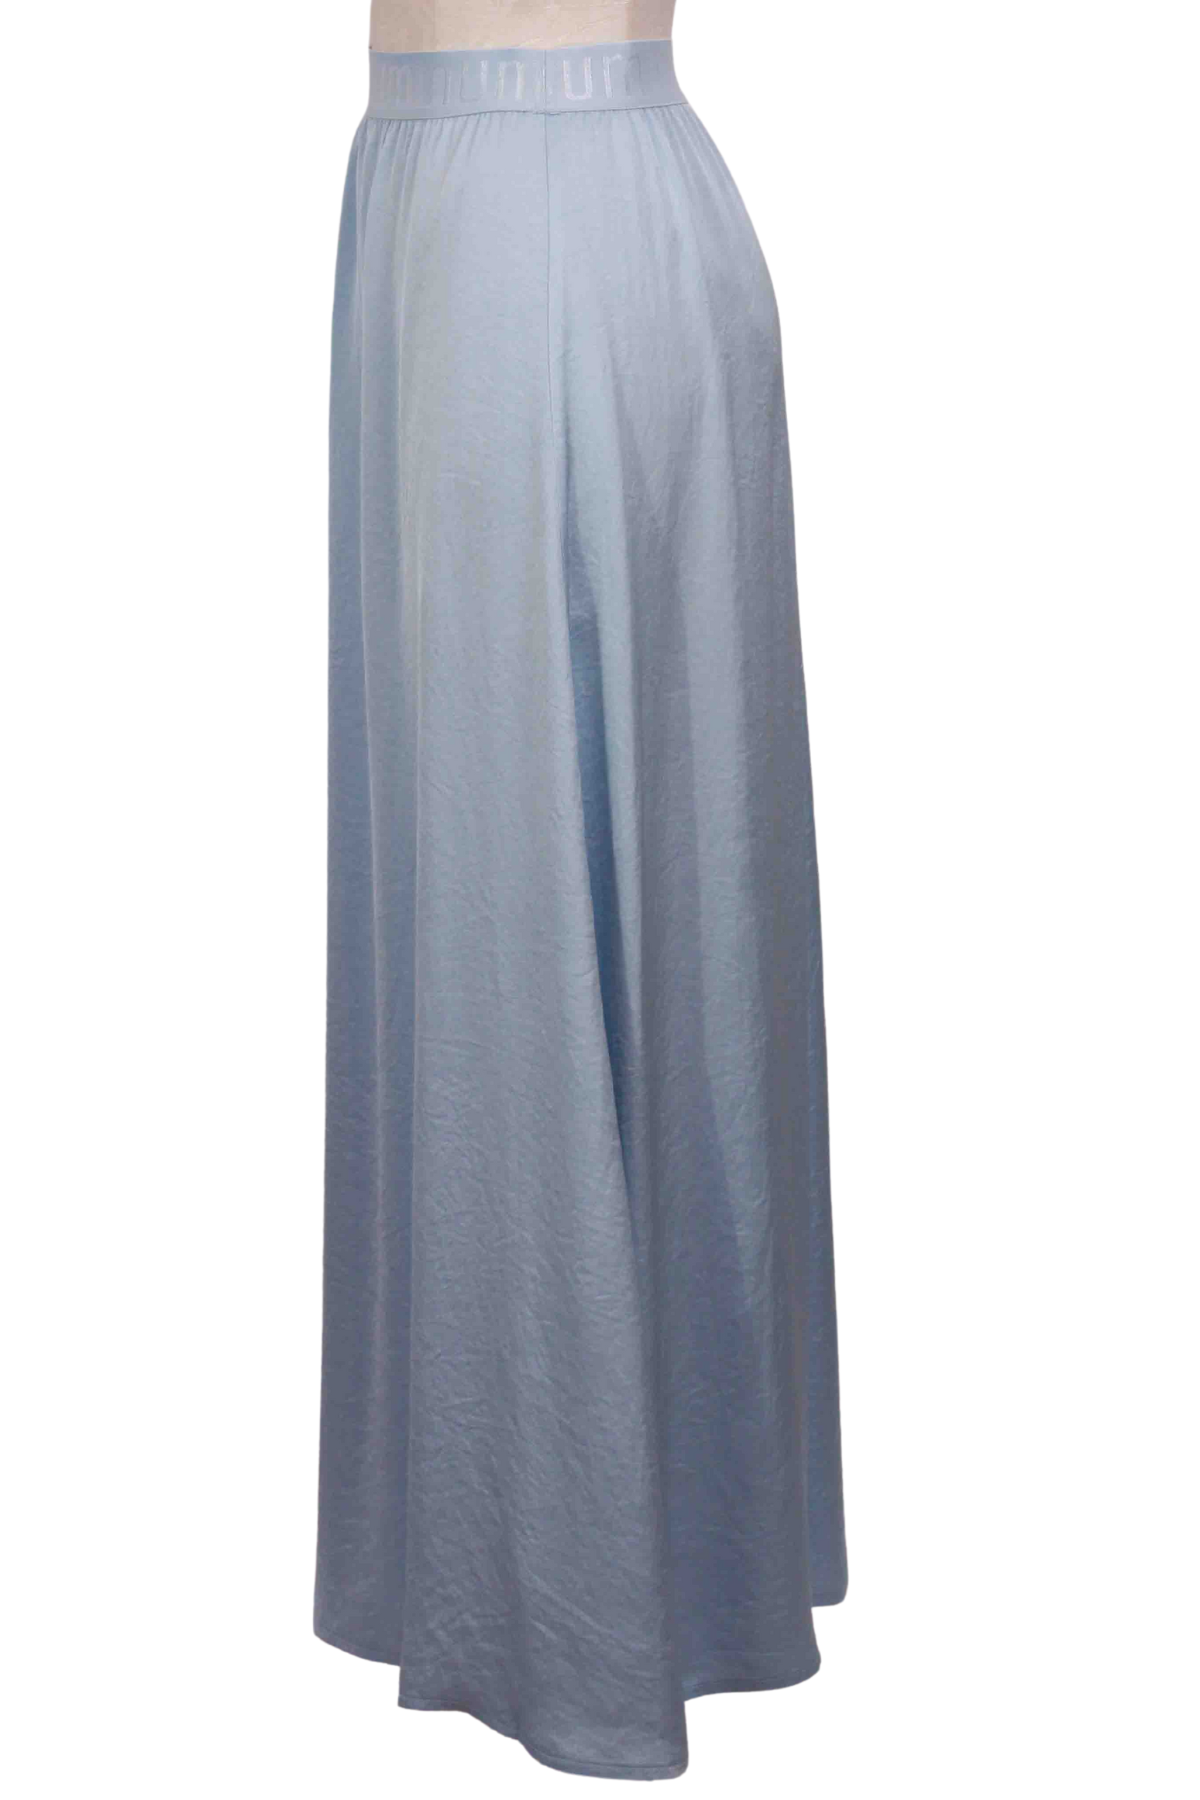 side view of Sky Blue Long Silky Flared Skirt by Summum